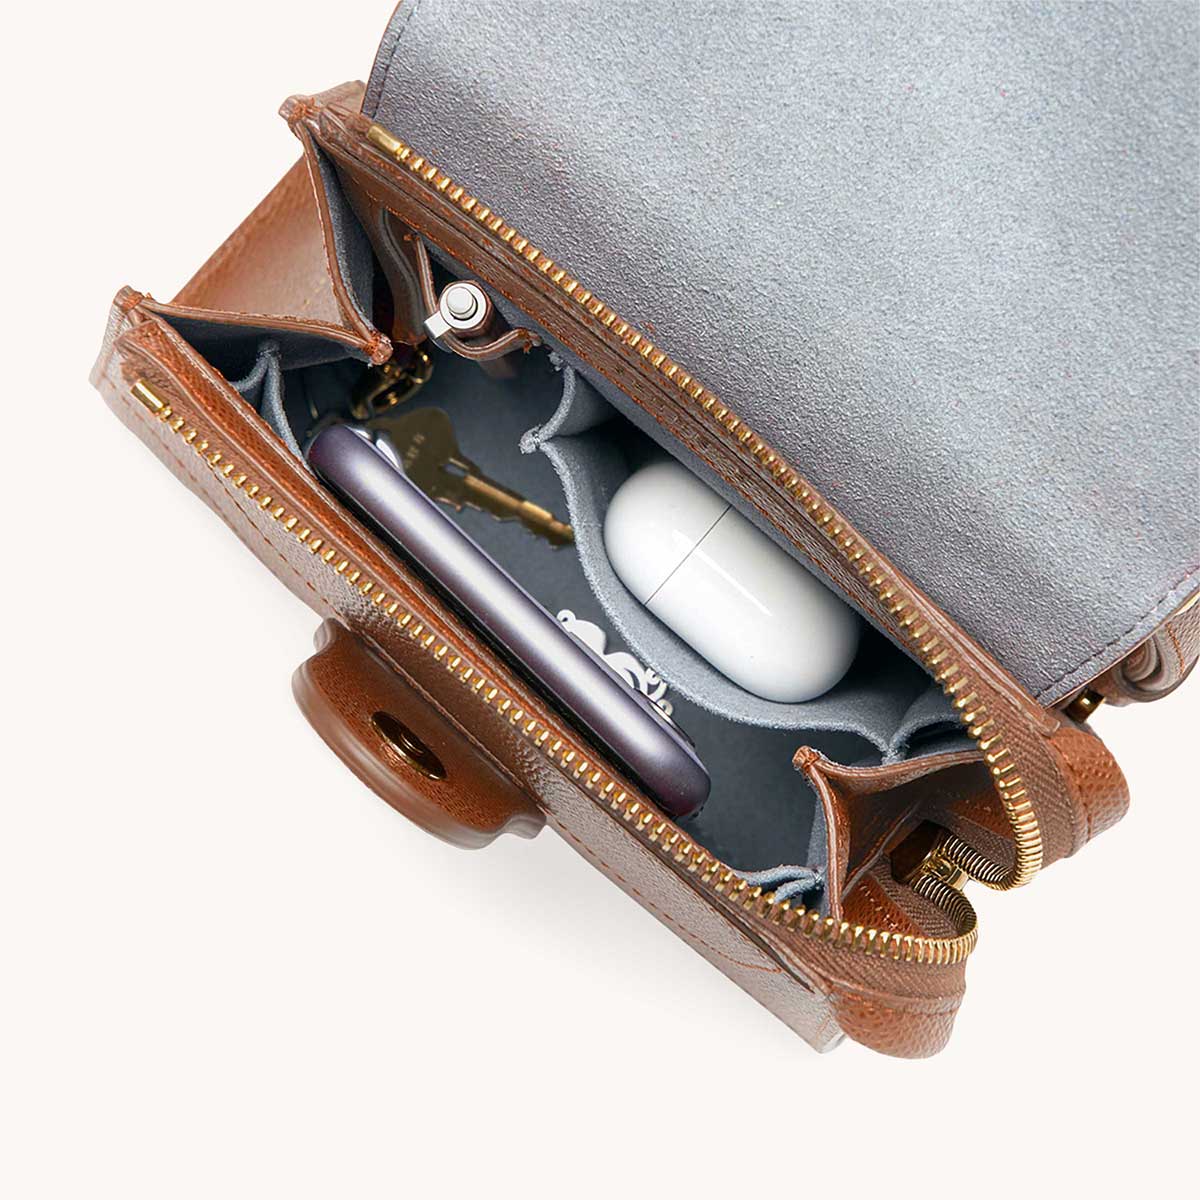 Mini Alunna Bag Pebbled Chestnut with Gold Hardware Interior View with What Fits: phone, AirPods, keys